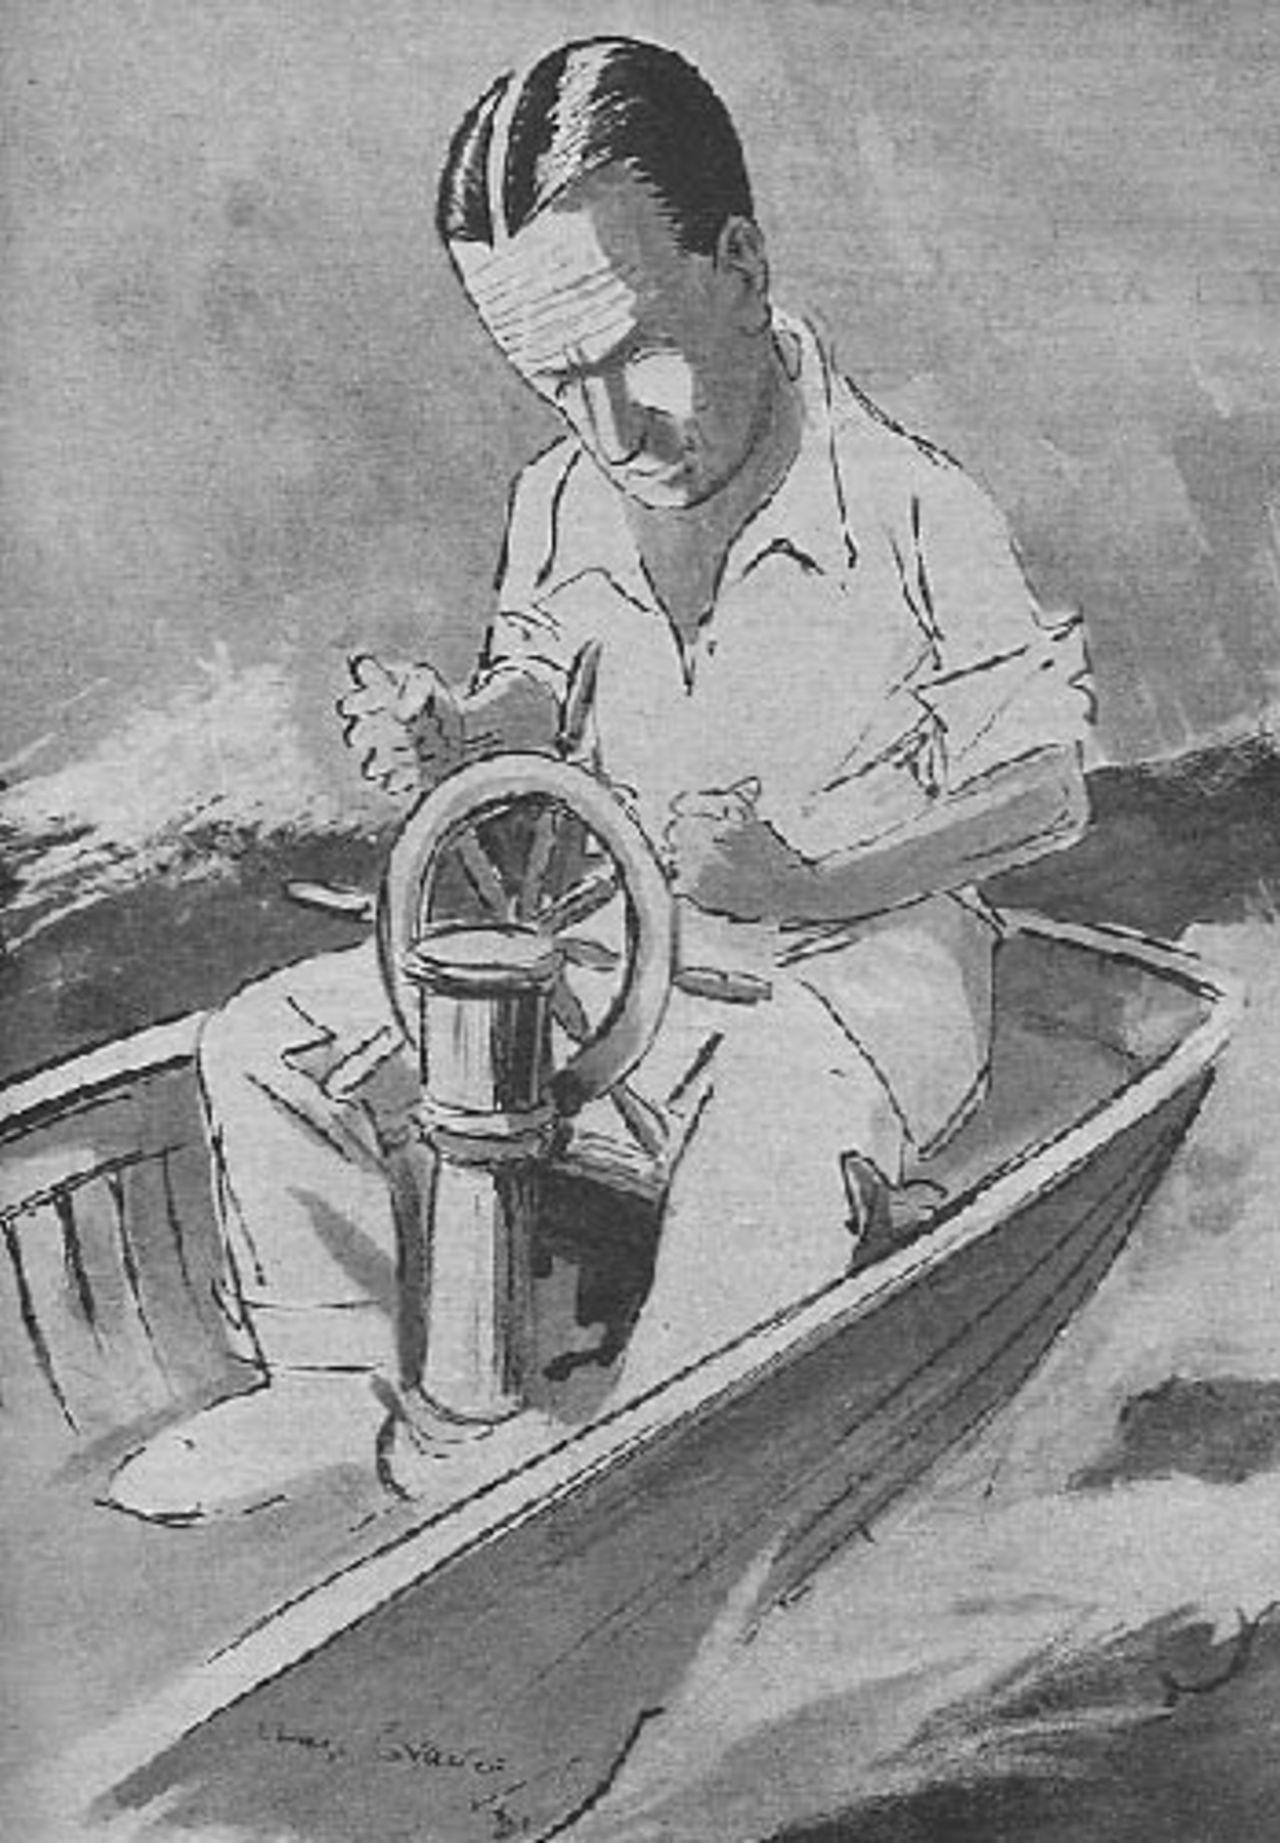 A rough sea but a calm pilot - Johnny Douglas as portrayed by the Cricketer in May, 1921